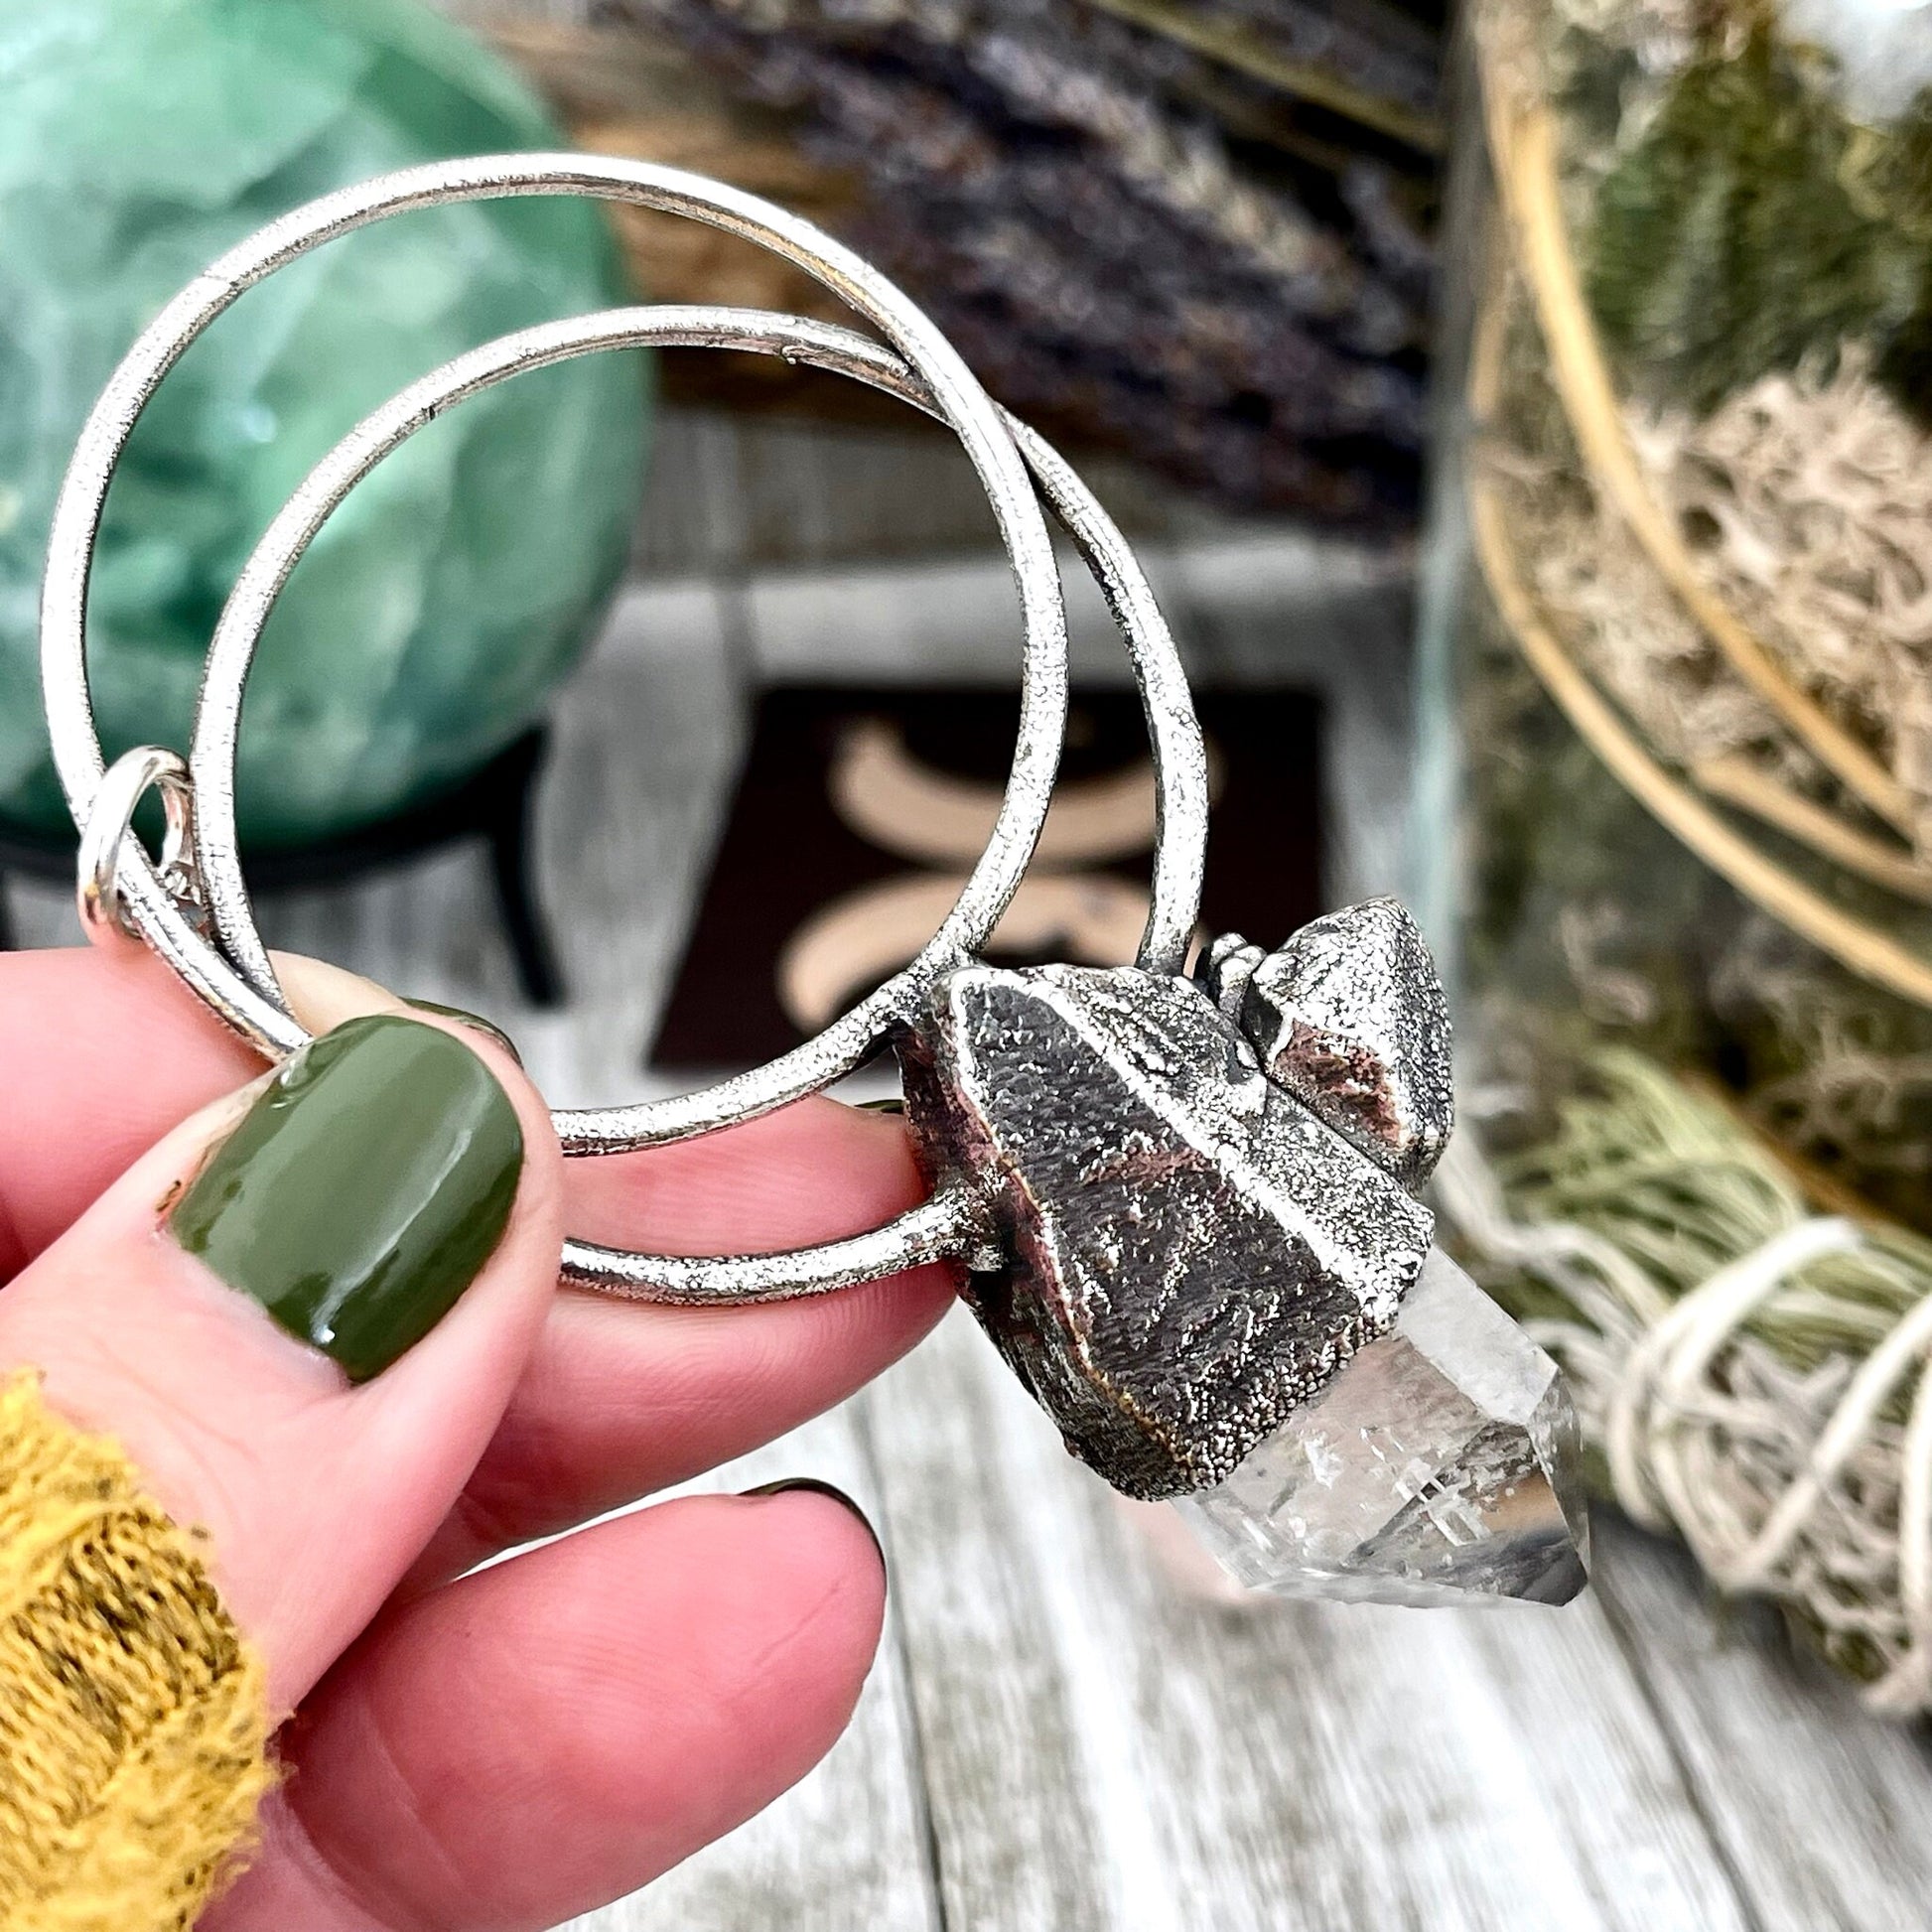 Big Crystal Necklace, Bohemian Jewelry, Clear Quartz, Crystal Necklaces, Etsy ID: 1590641495, FOXLARK- NECKLACES, Jewelry, Large Crystal, Large Raw Crystal, layering necklace, Necklaces, Raw crystal jewelry, raw crystal necklace, raw crystal pendant, Raw